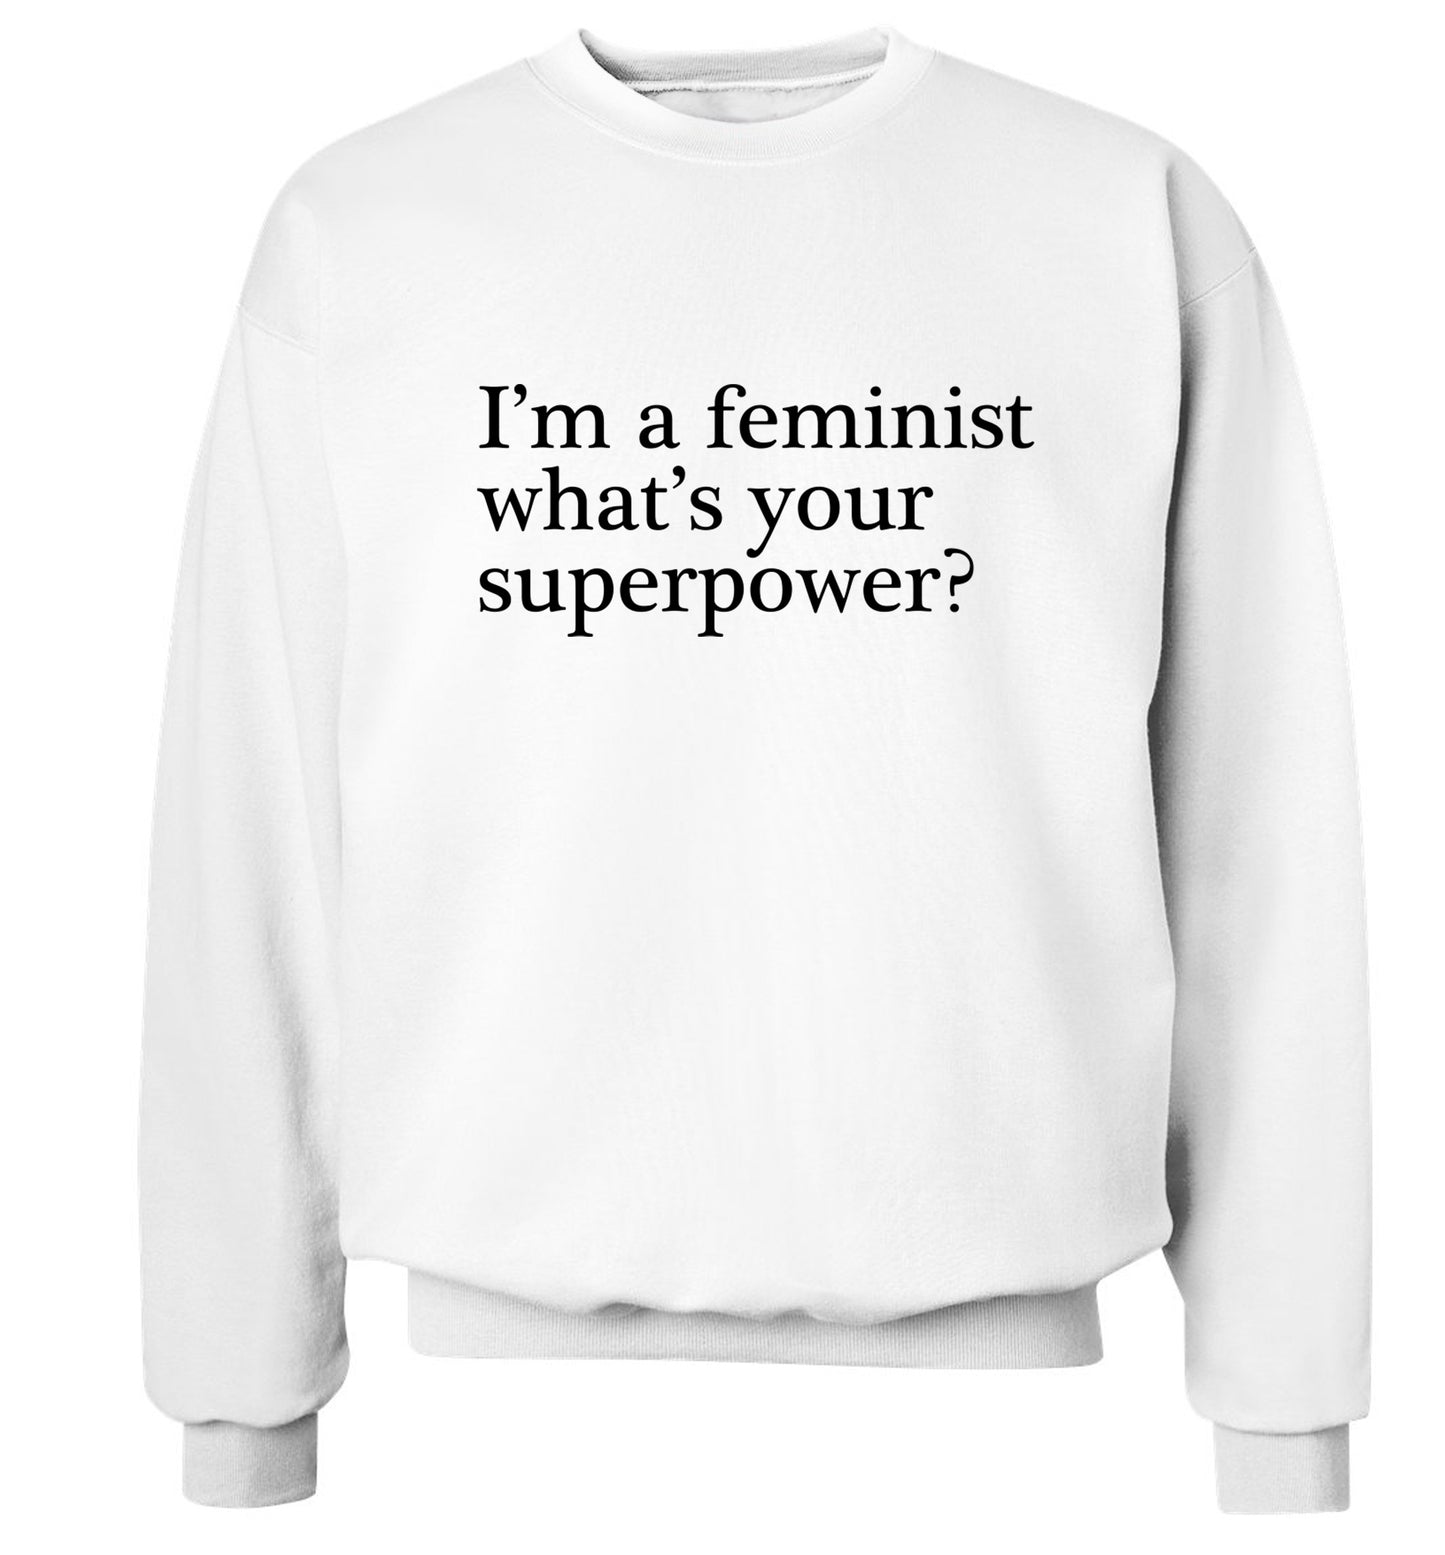 I'm a feminist what's your superpower? Adult's unisex white Sweater 2XL